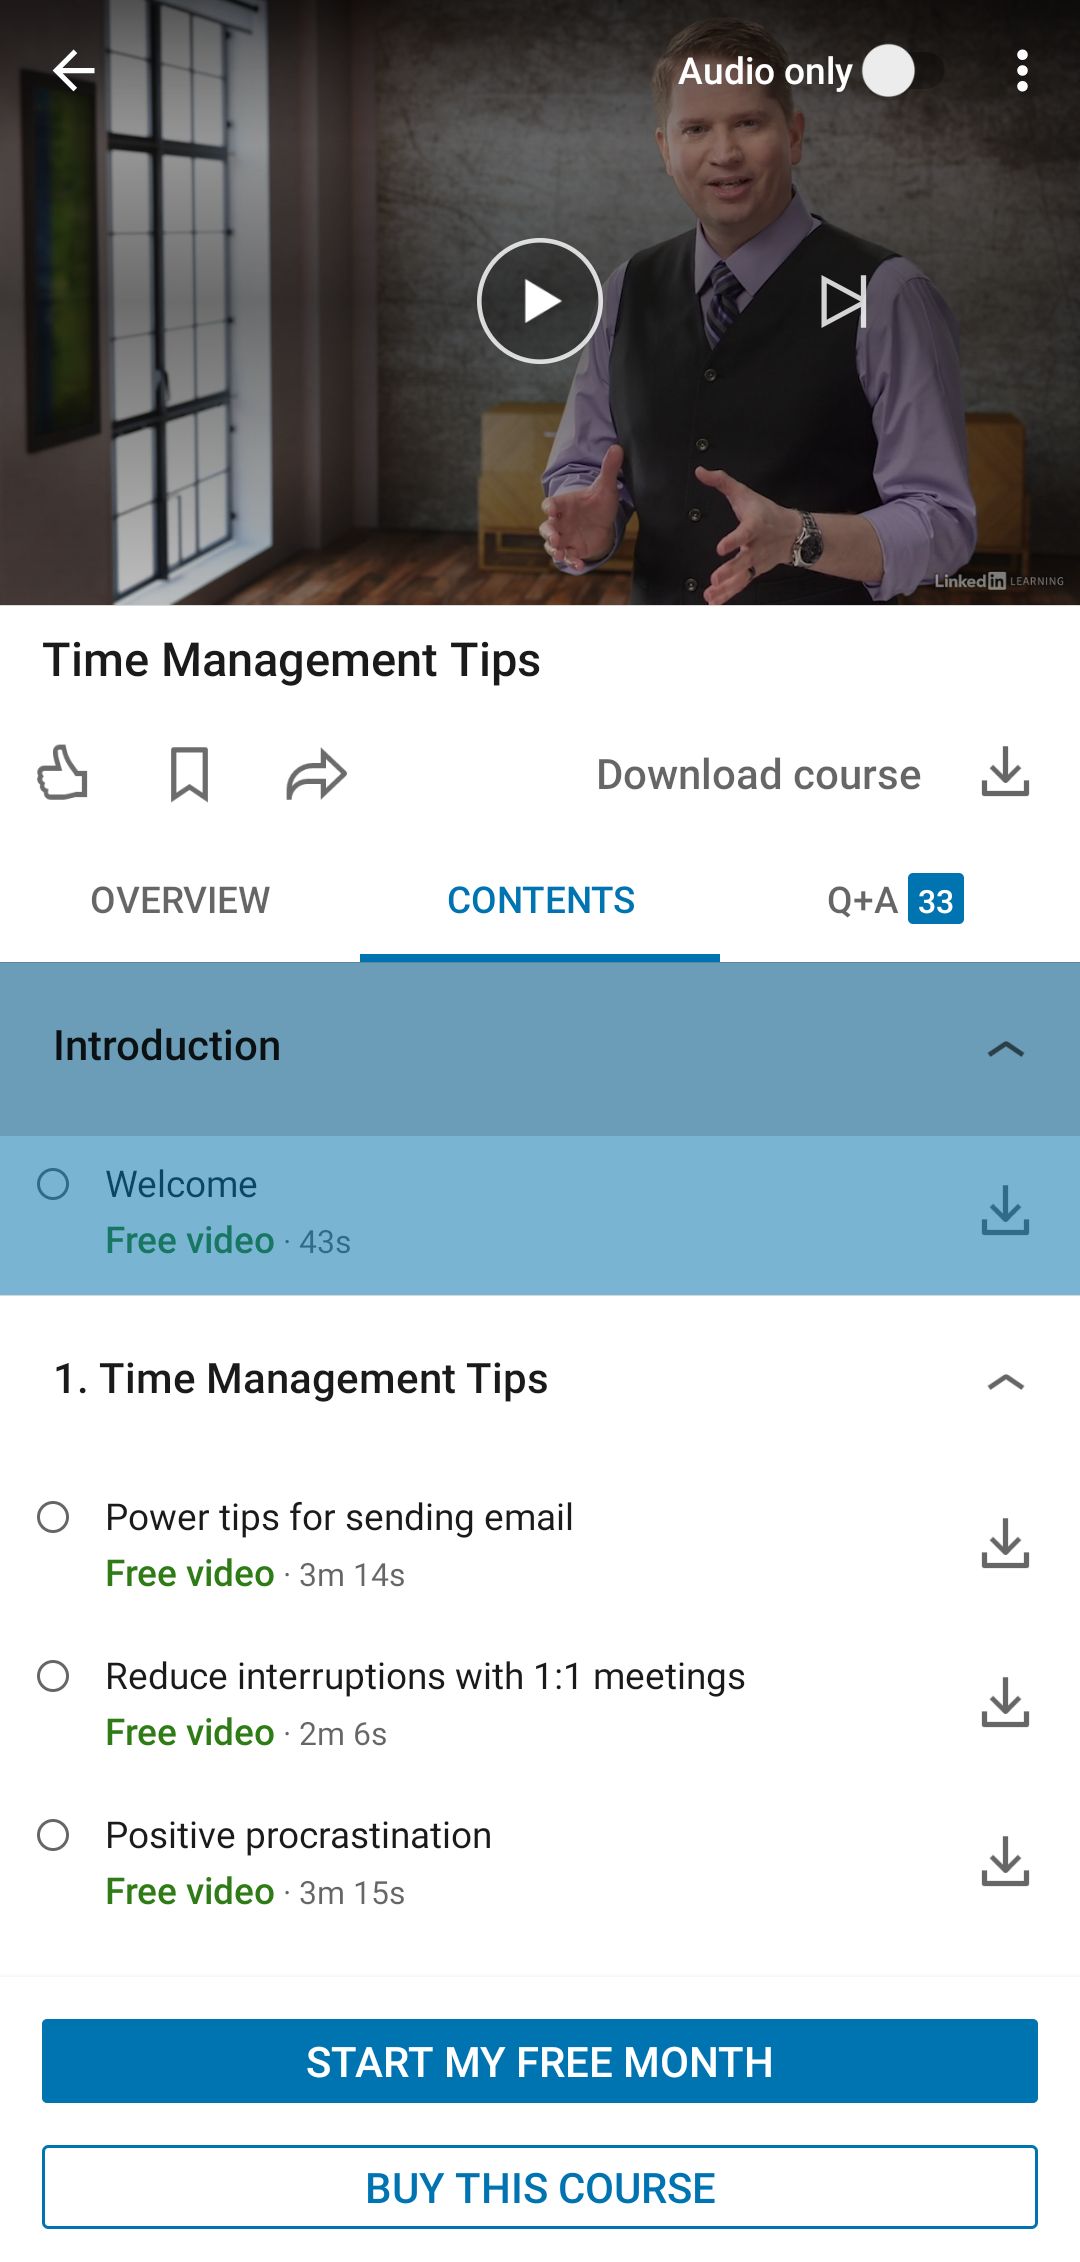 LinkedIn Learning App Contents Tab in Course